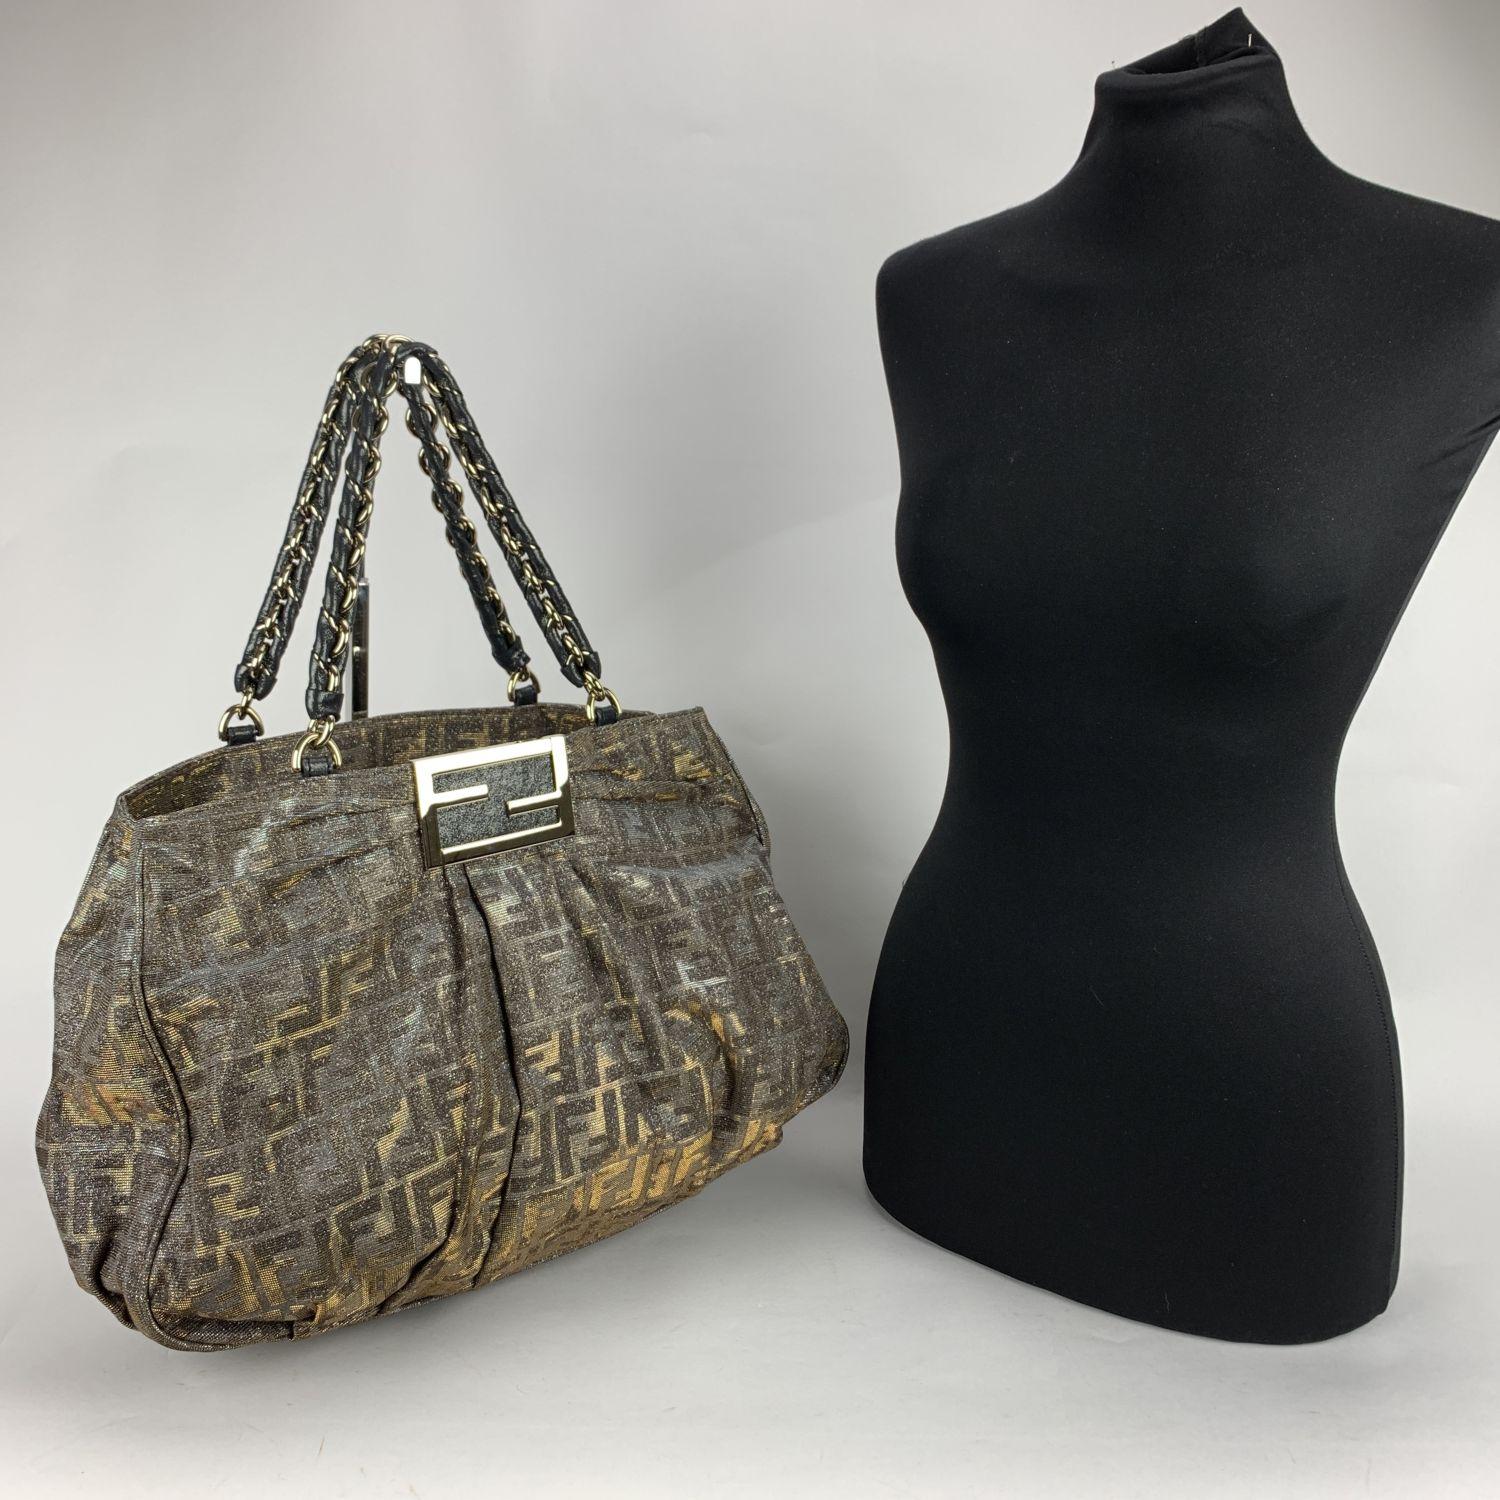 Beautiful Fendi 'Mia Chain' tote bag. Crafted of glittered Zucca FF monogram canvas with gold metal hardware. The bag has 2 chain-link handles. Open top. 2 main sections inside and 1 middle zip section. FF - FENDI logo in gold tone metal. Black